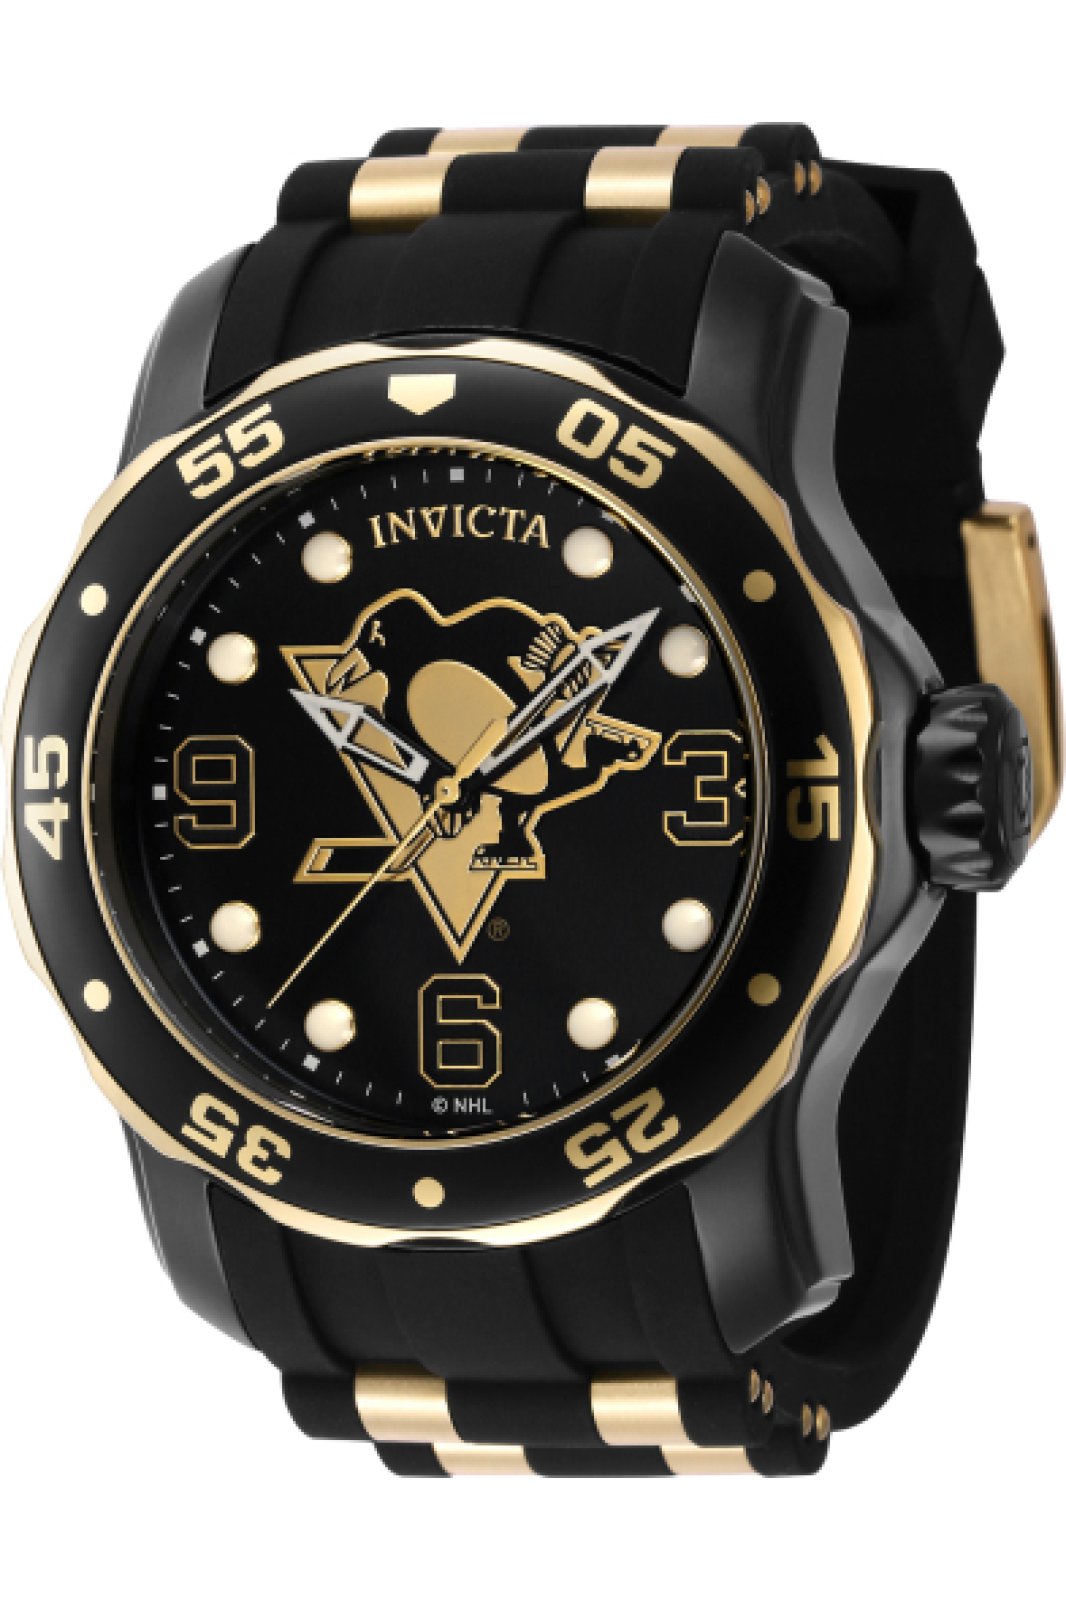 Invicta Watch NHL - Pittsburgh Penguins 42322 - Official Invicta Store